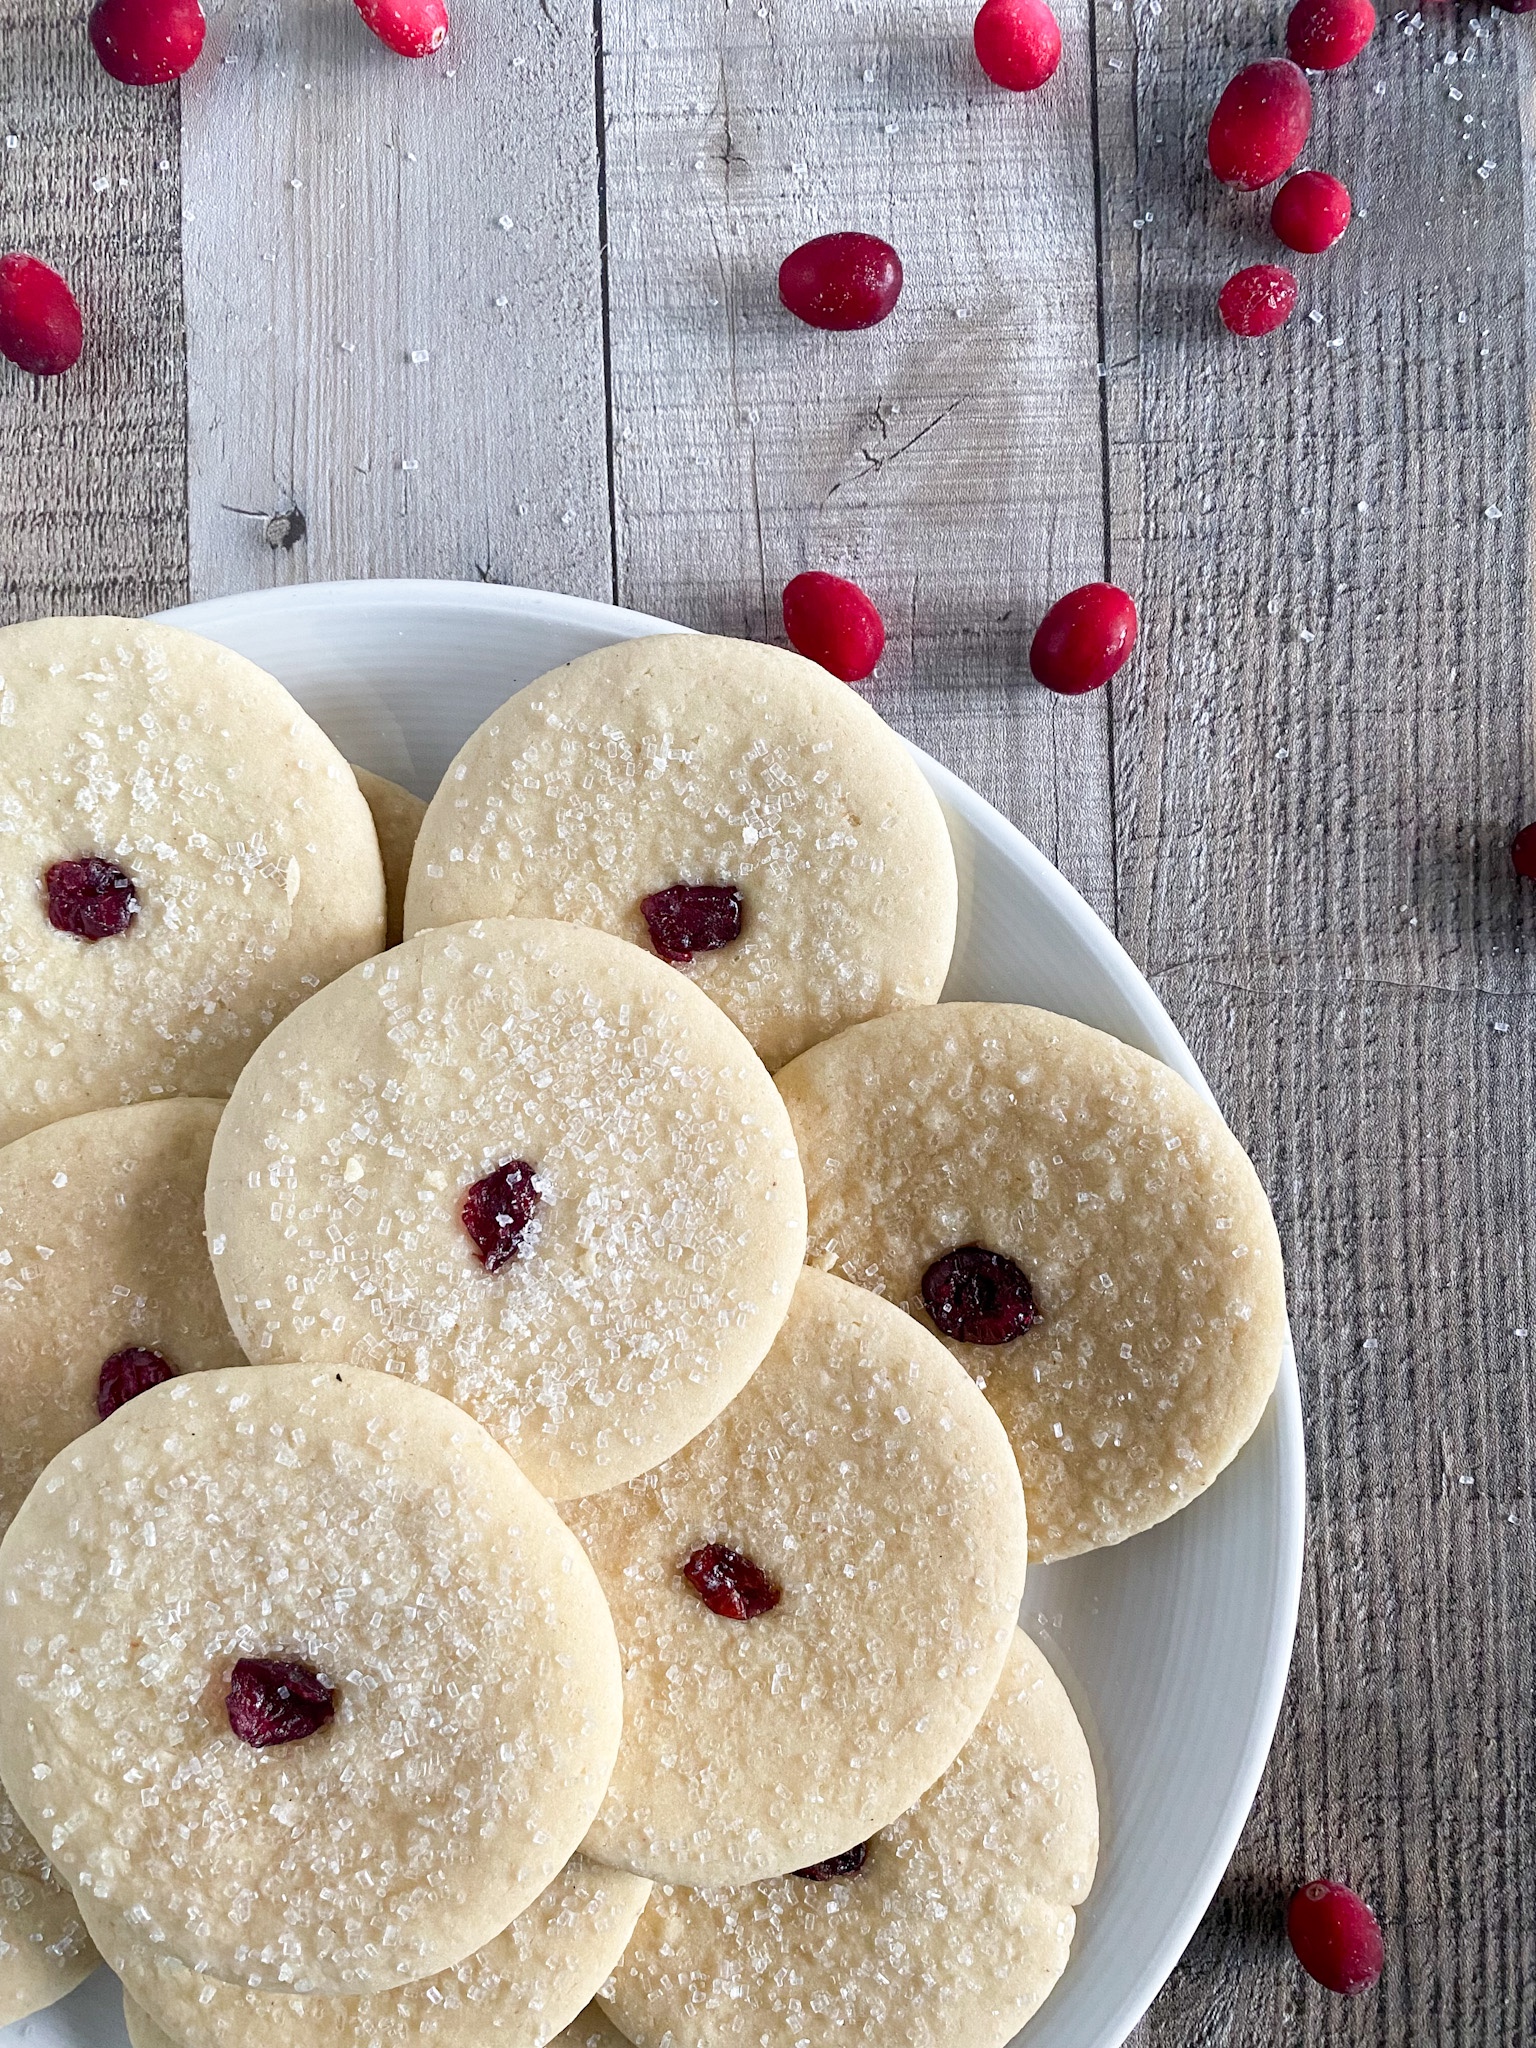 round sugar cookies with a cranberry in the center sit on a white plate on a wooden surface.